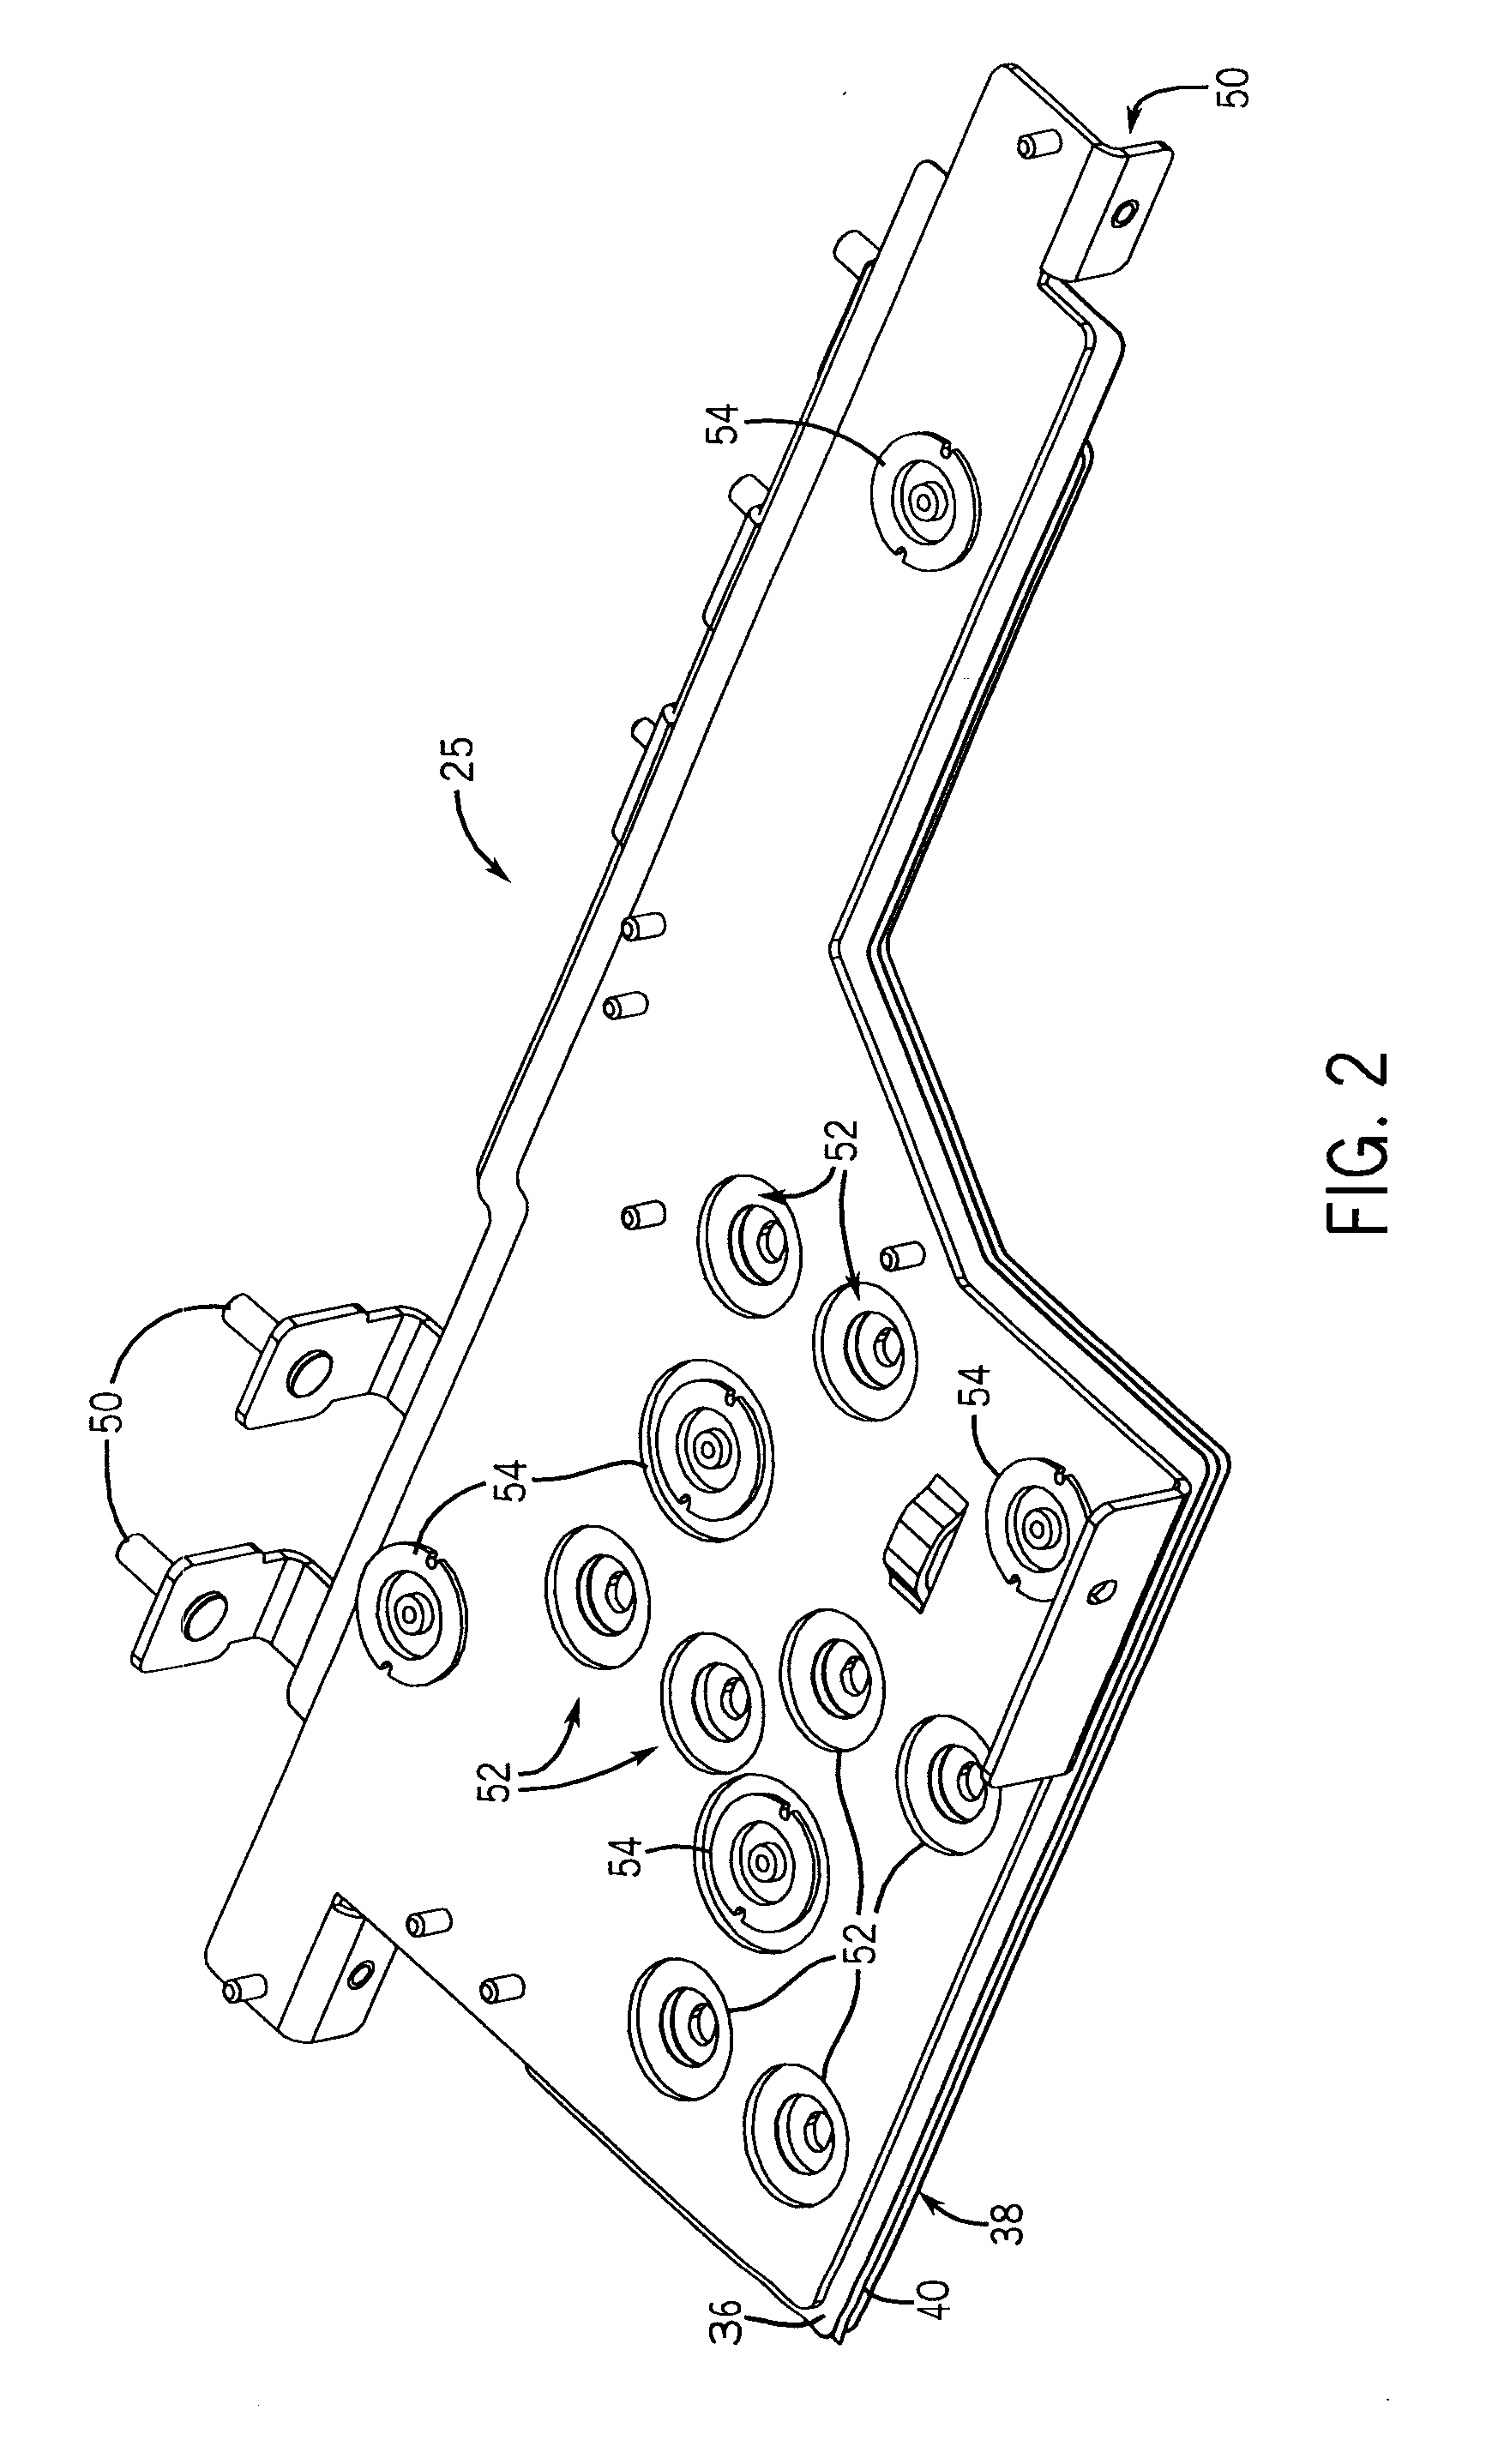 Adhesive-Less DC Bus System and Method for Manufacturing